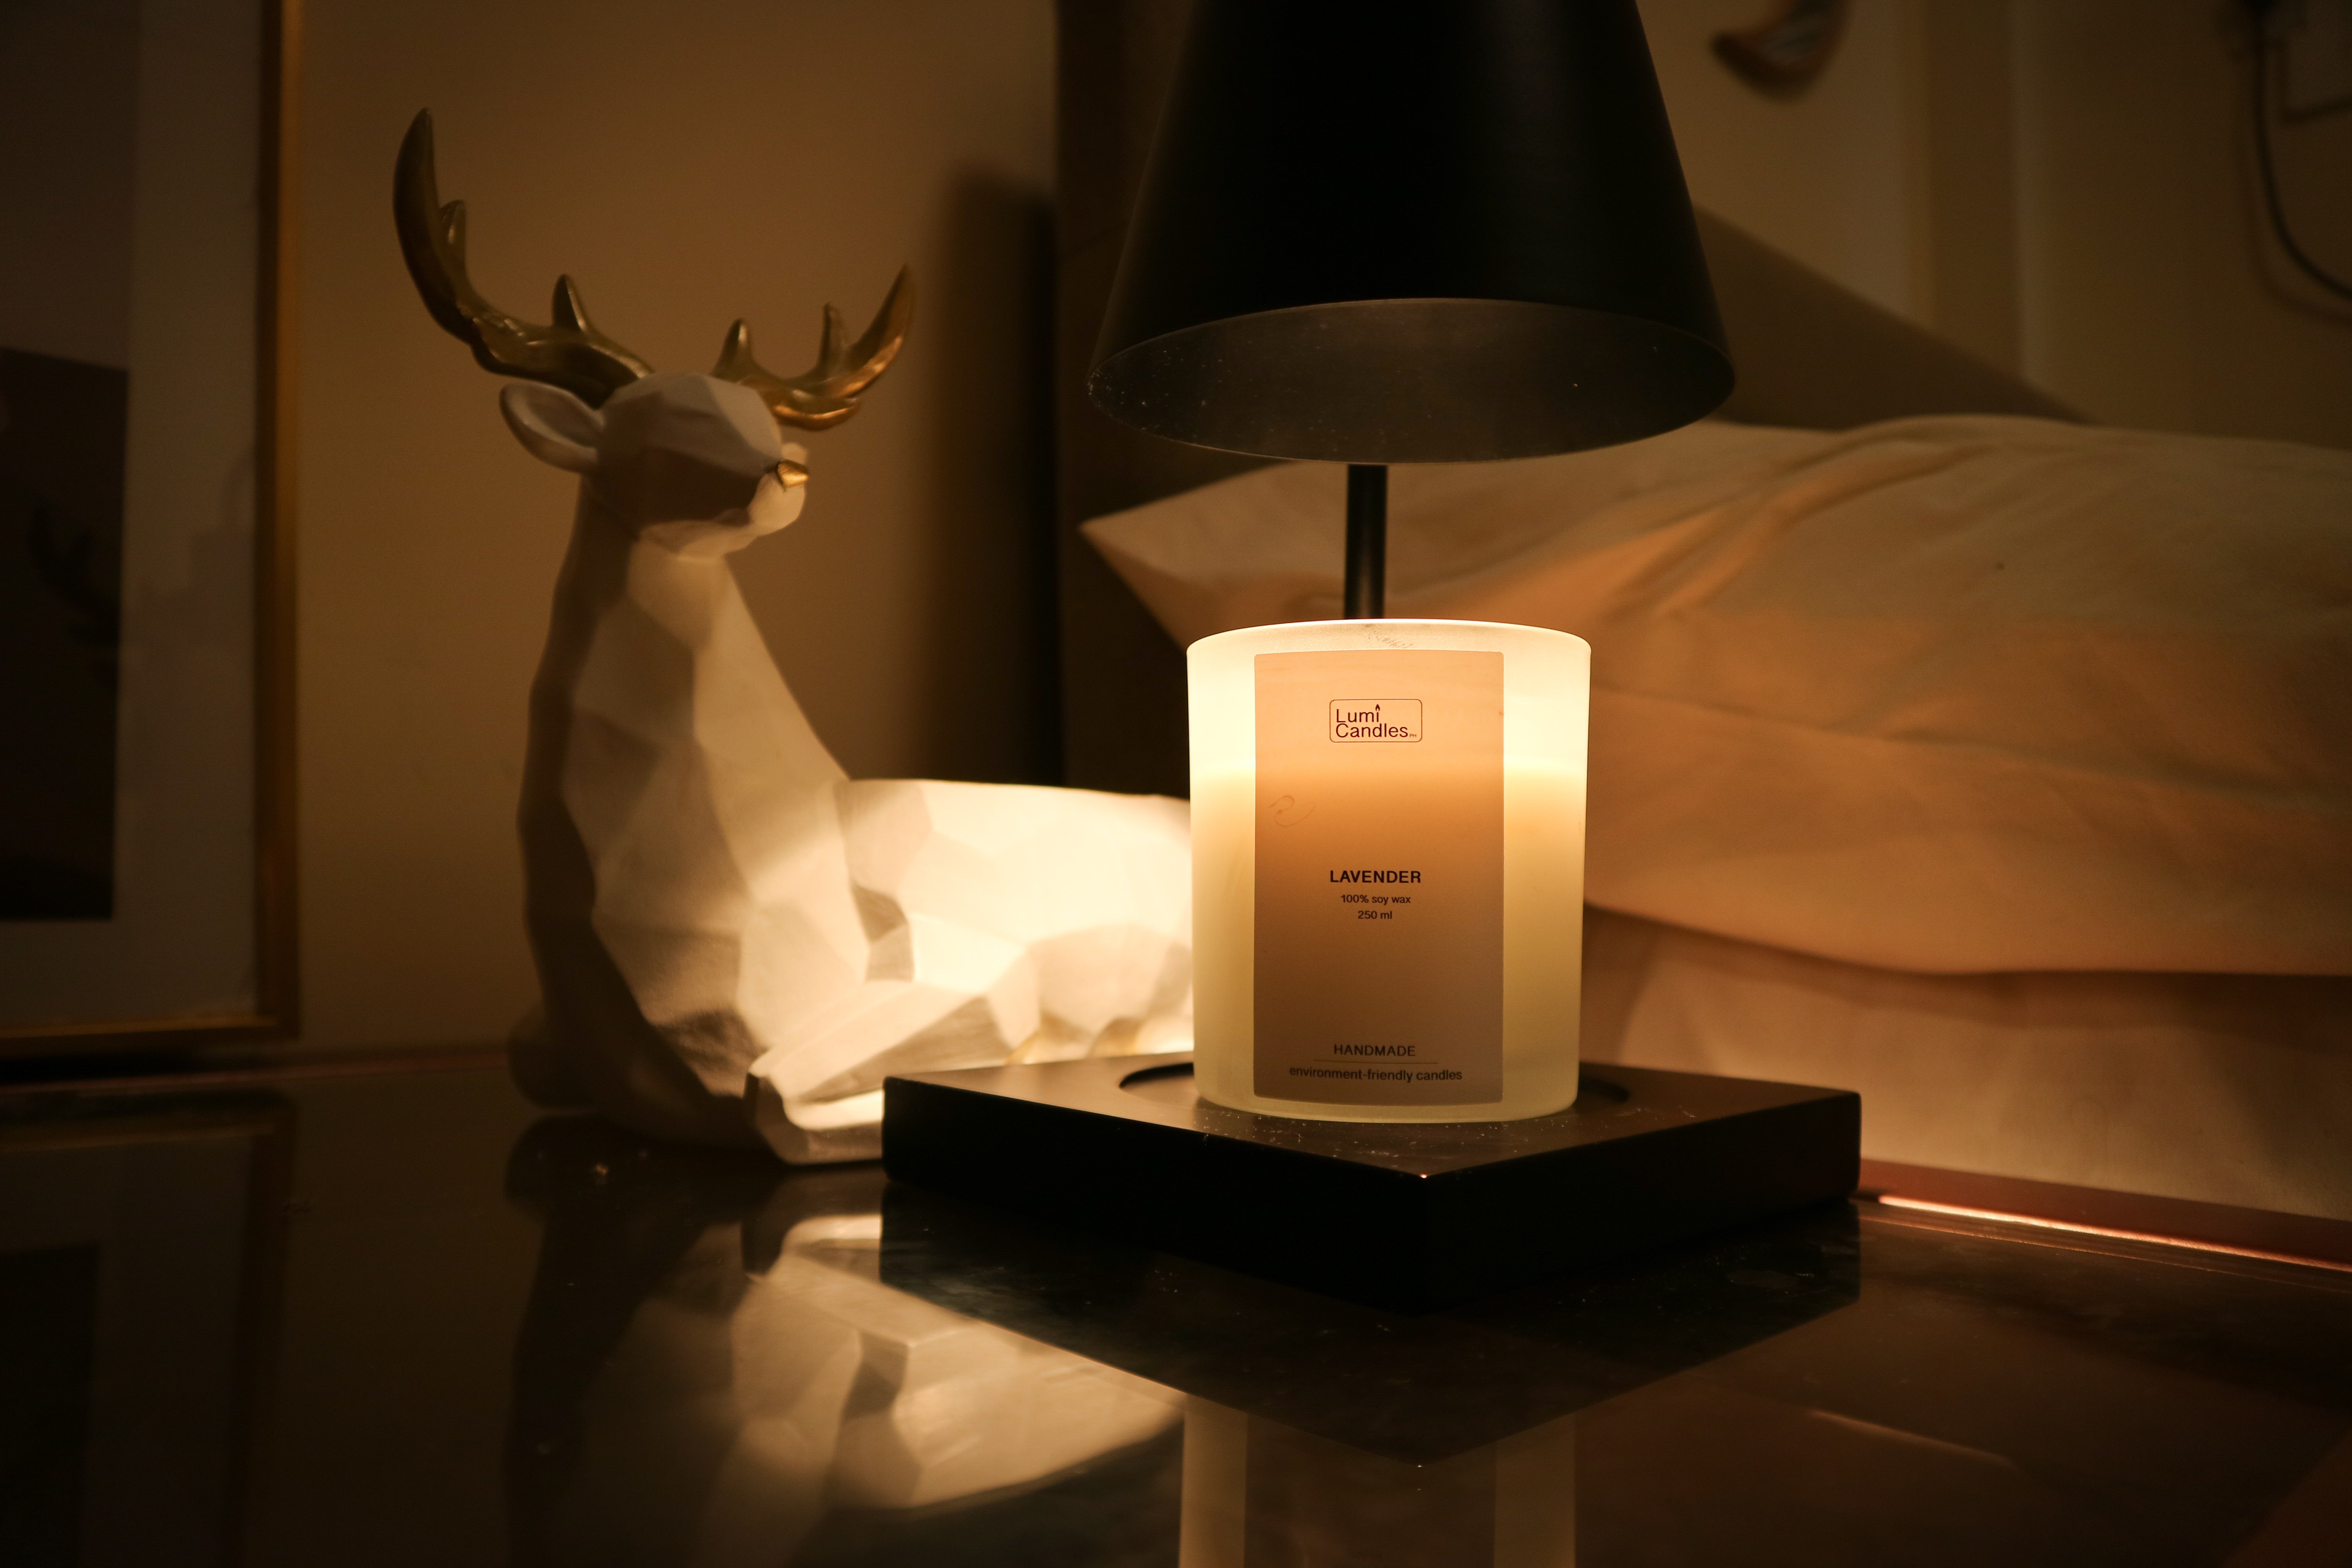 LUMI Lavender scented soy candle lit up in a room